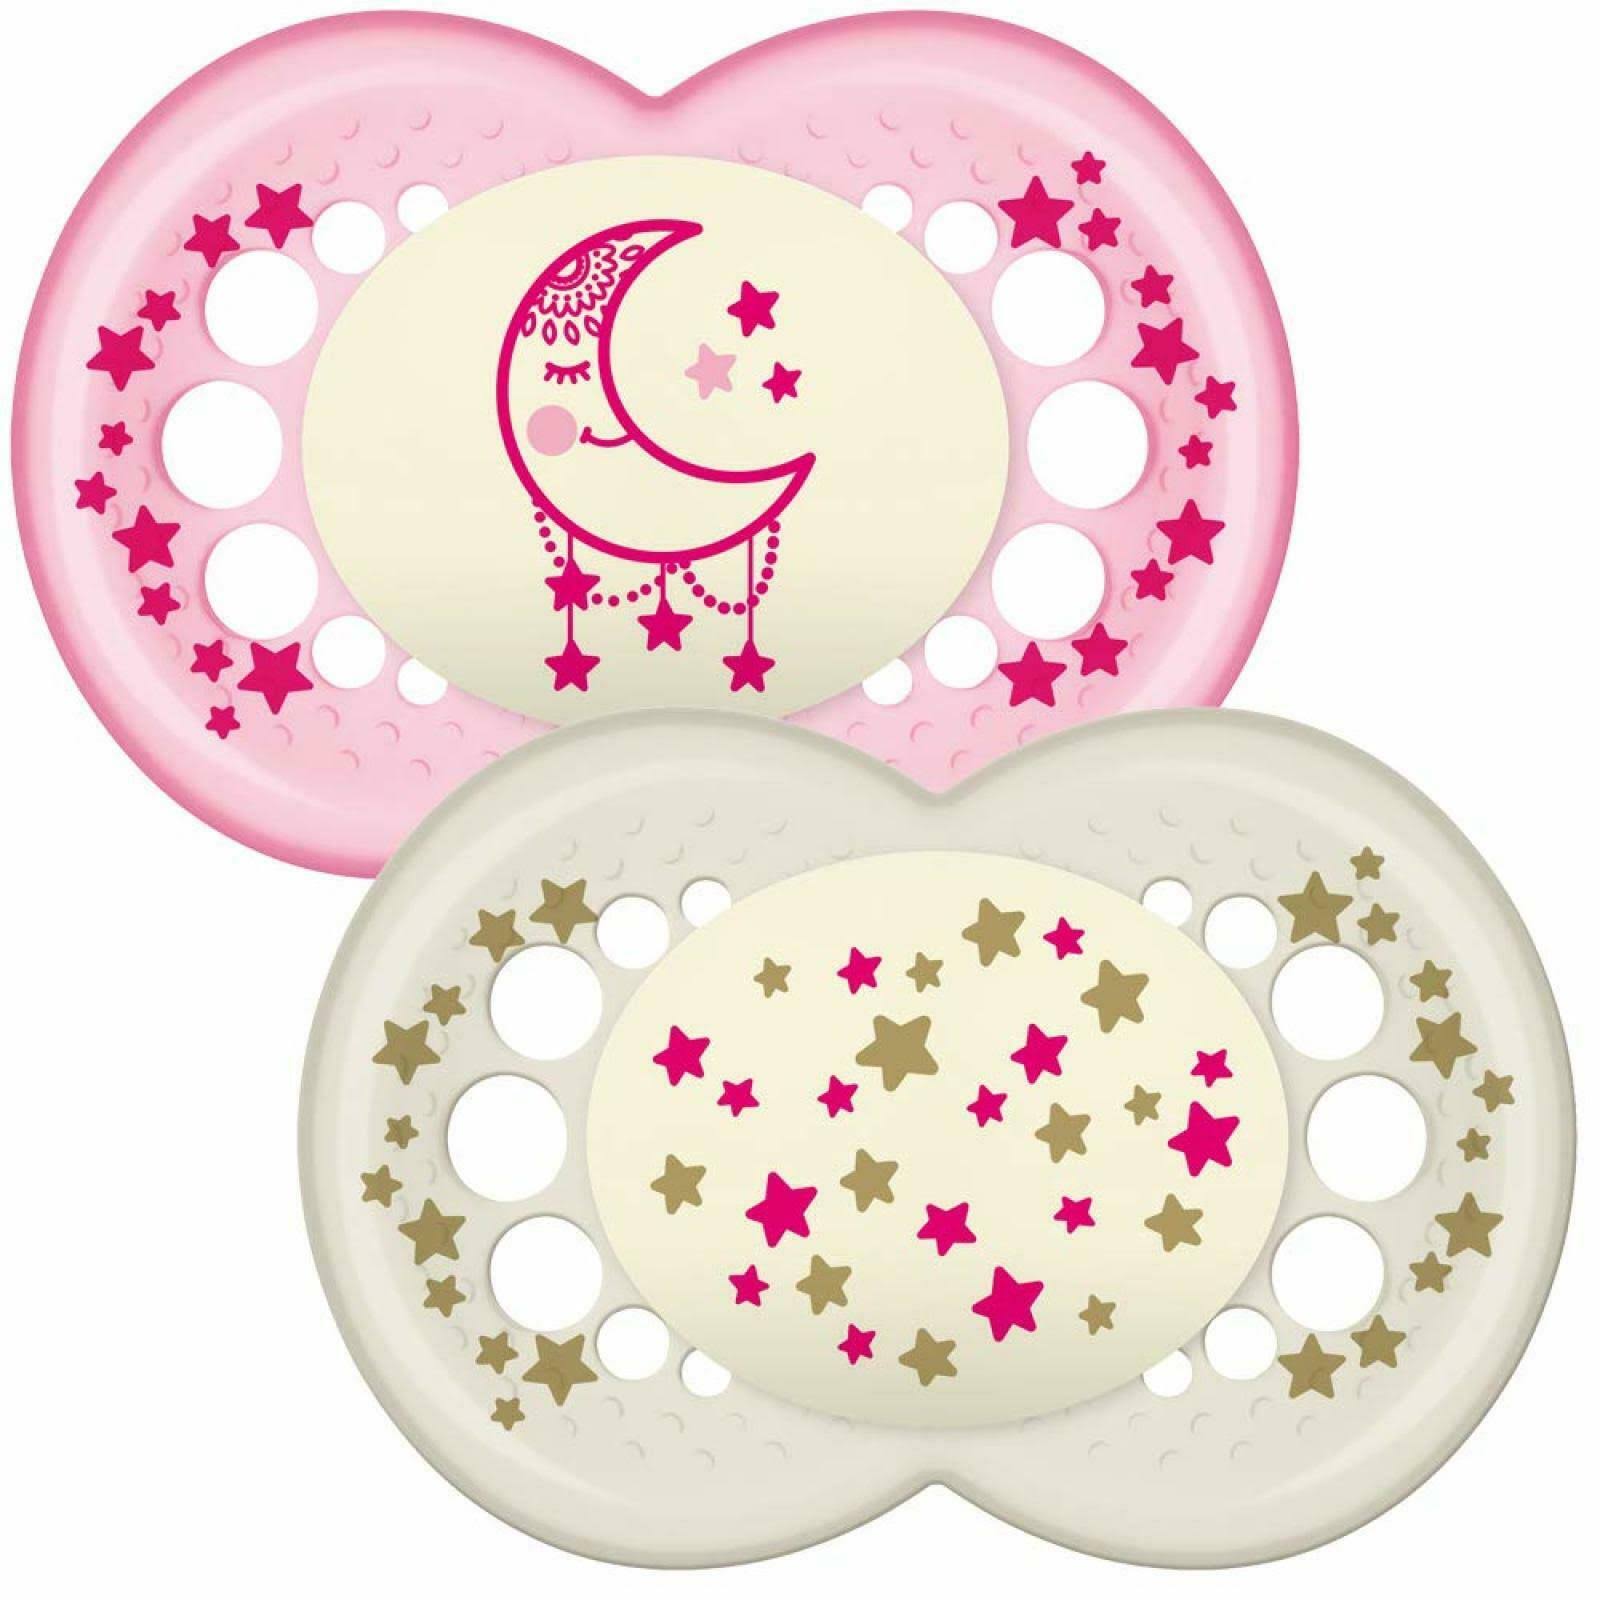 MAM Night Soother 12 Months Plus - Pink